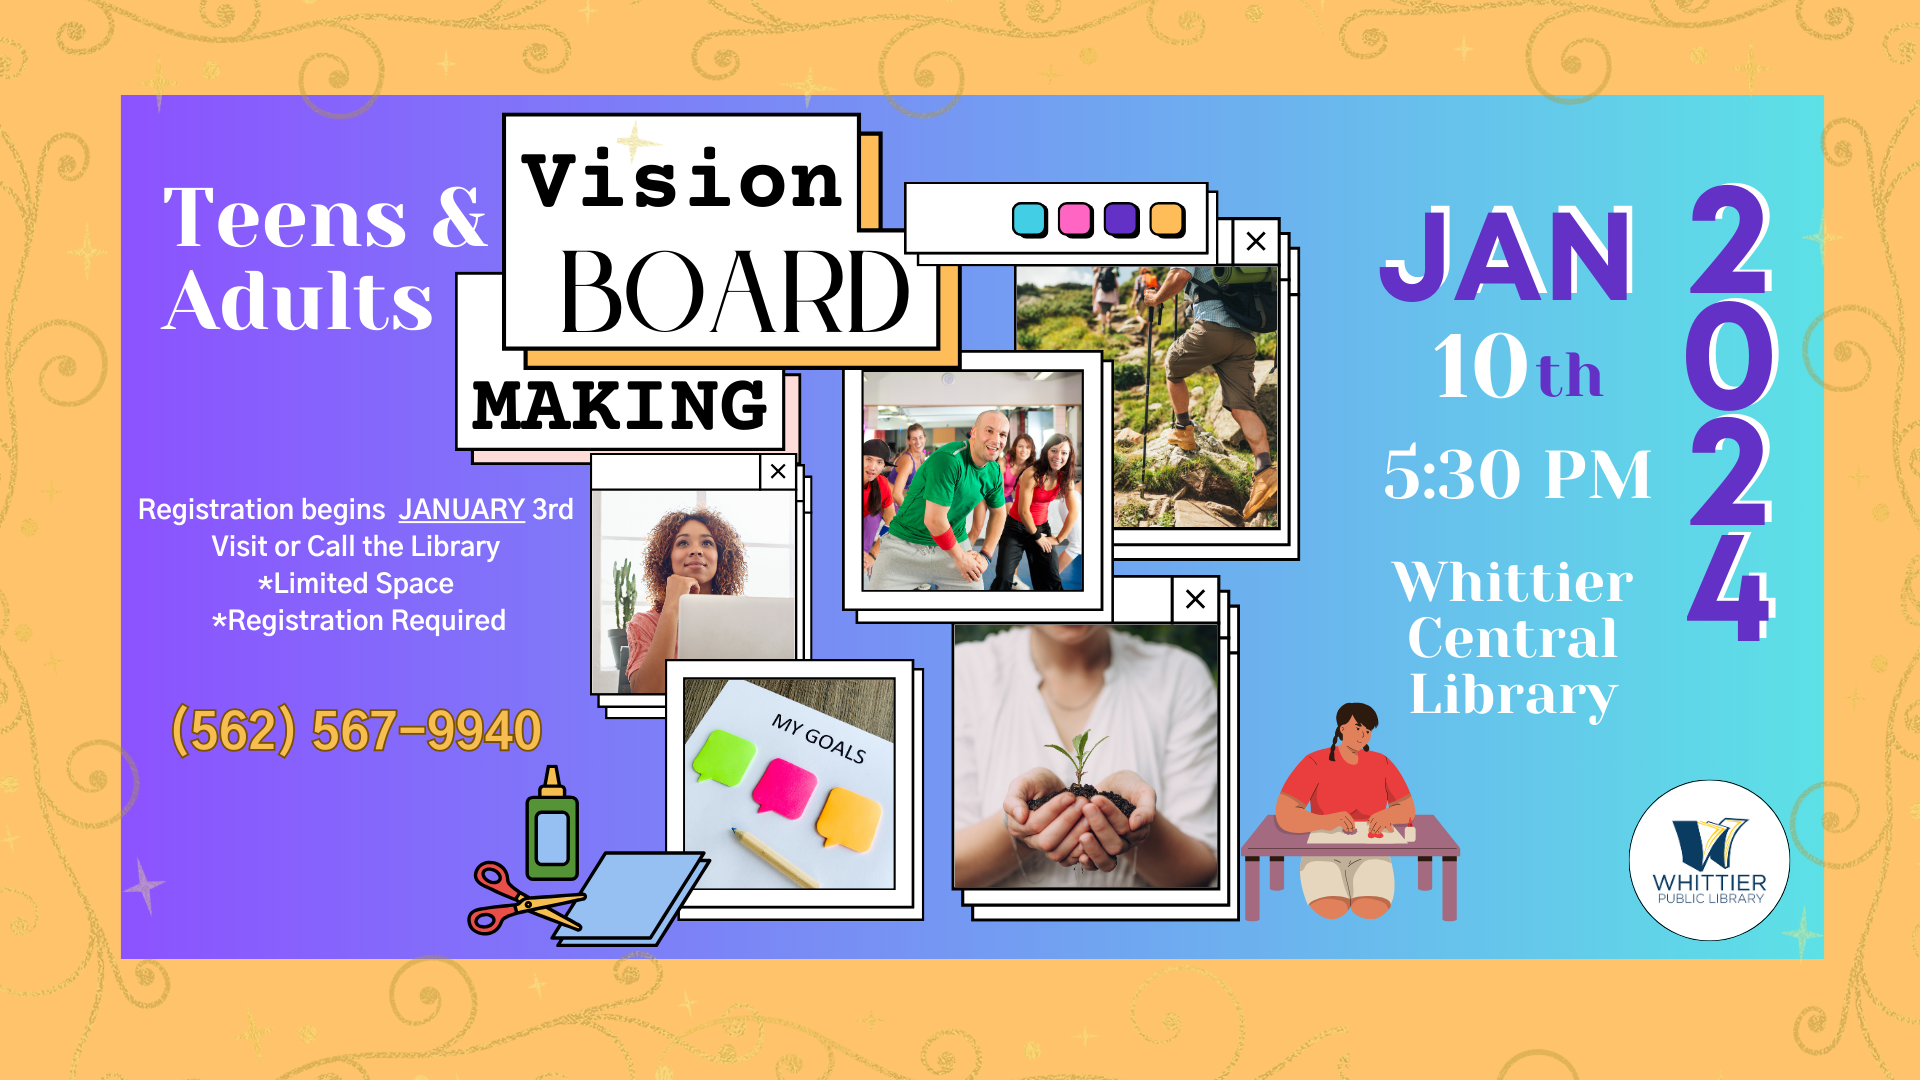 Vision Board Making - Whittier Public Library Foundation